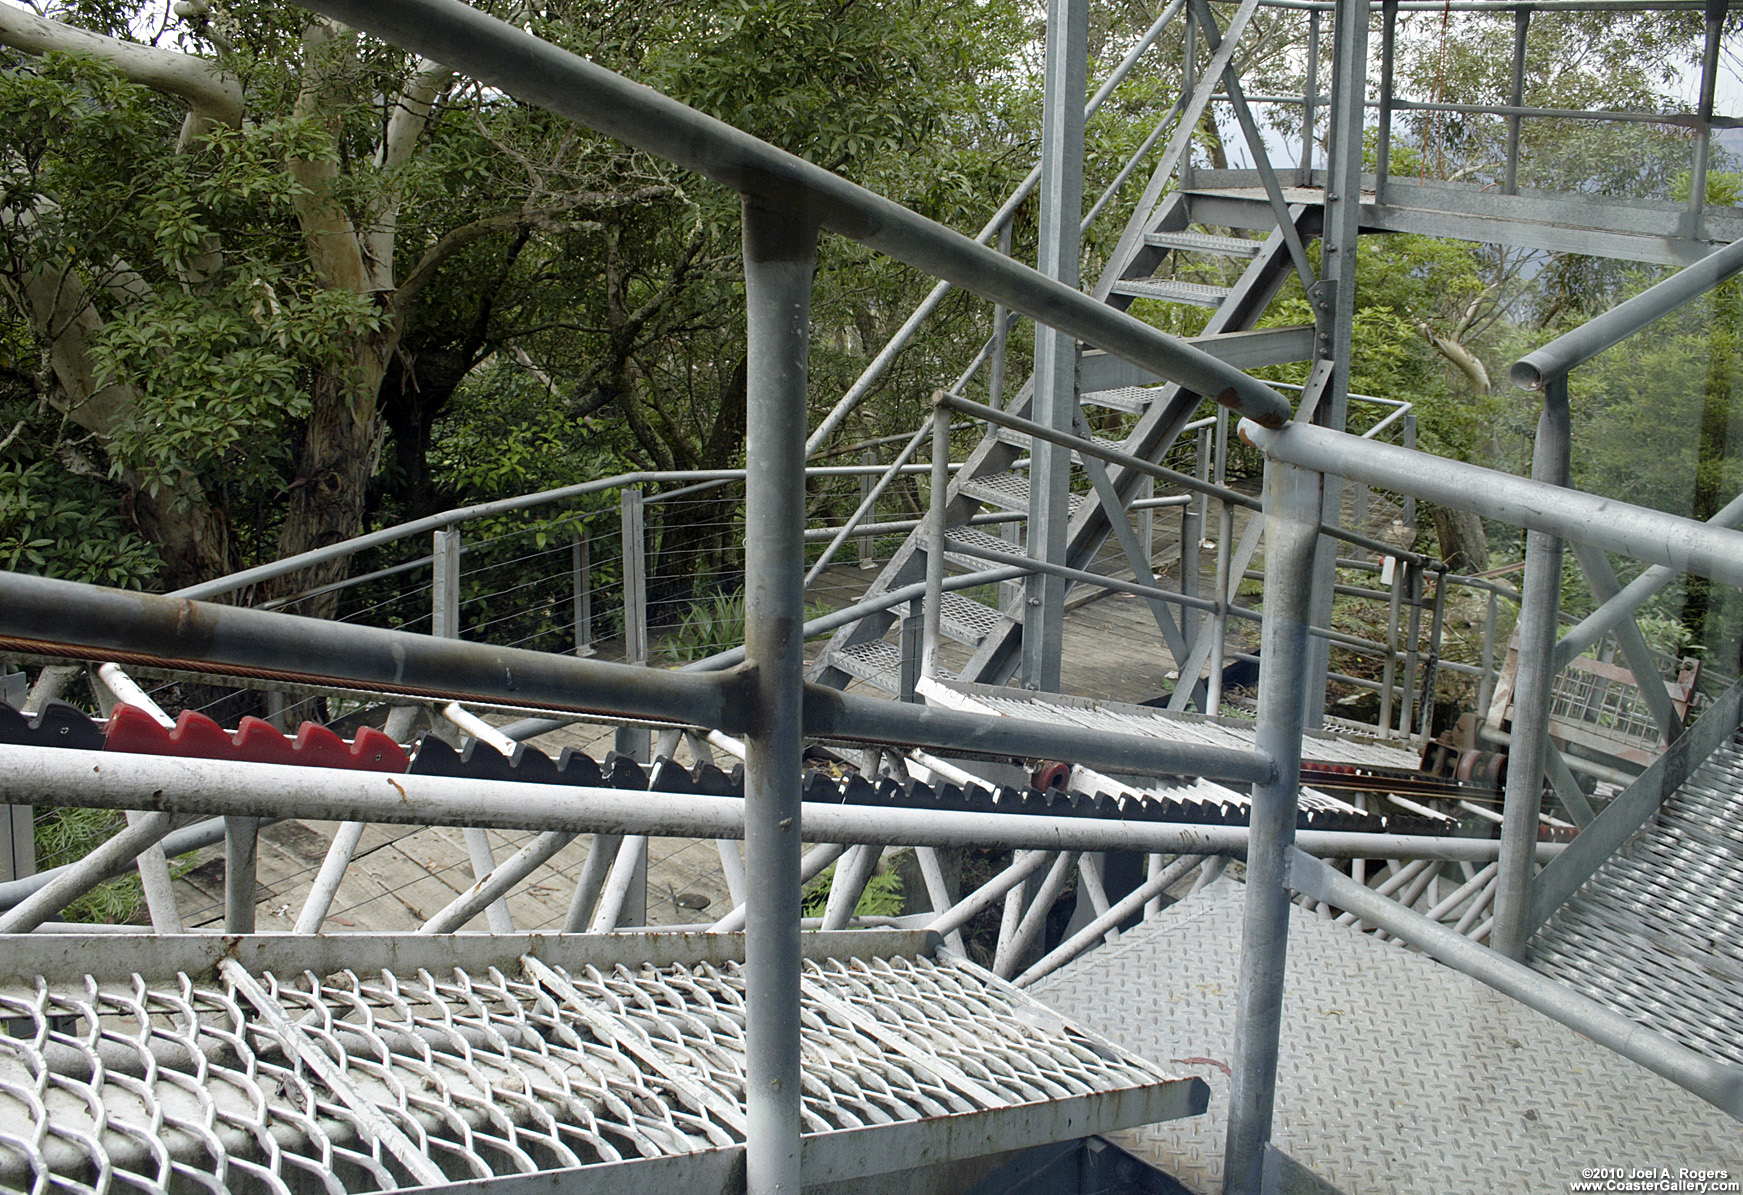 Close-up of a lift hill on a roller coaster